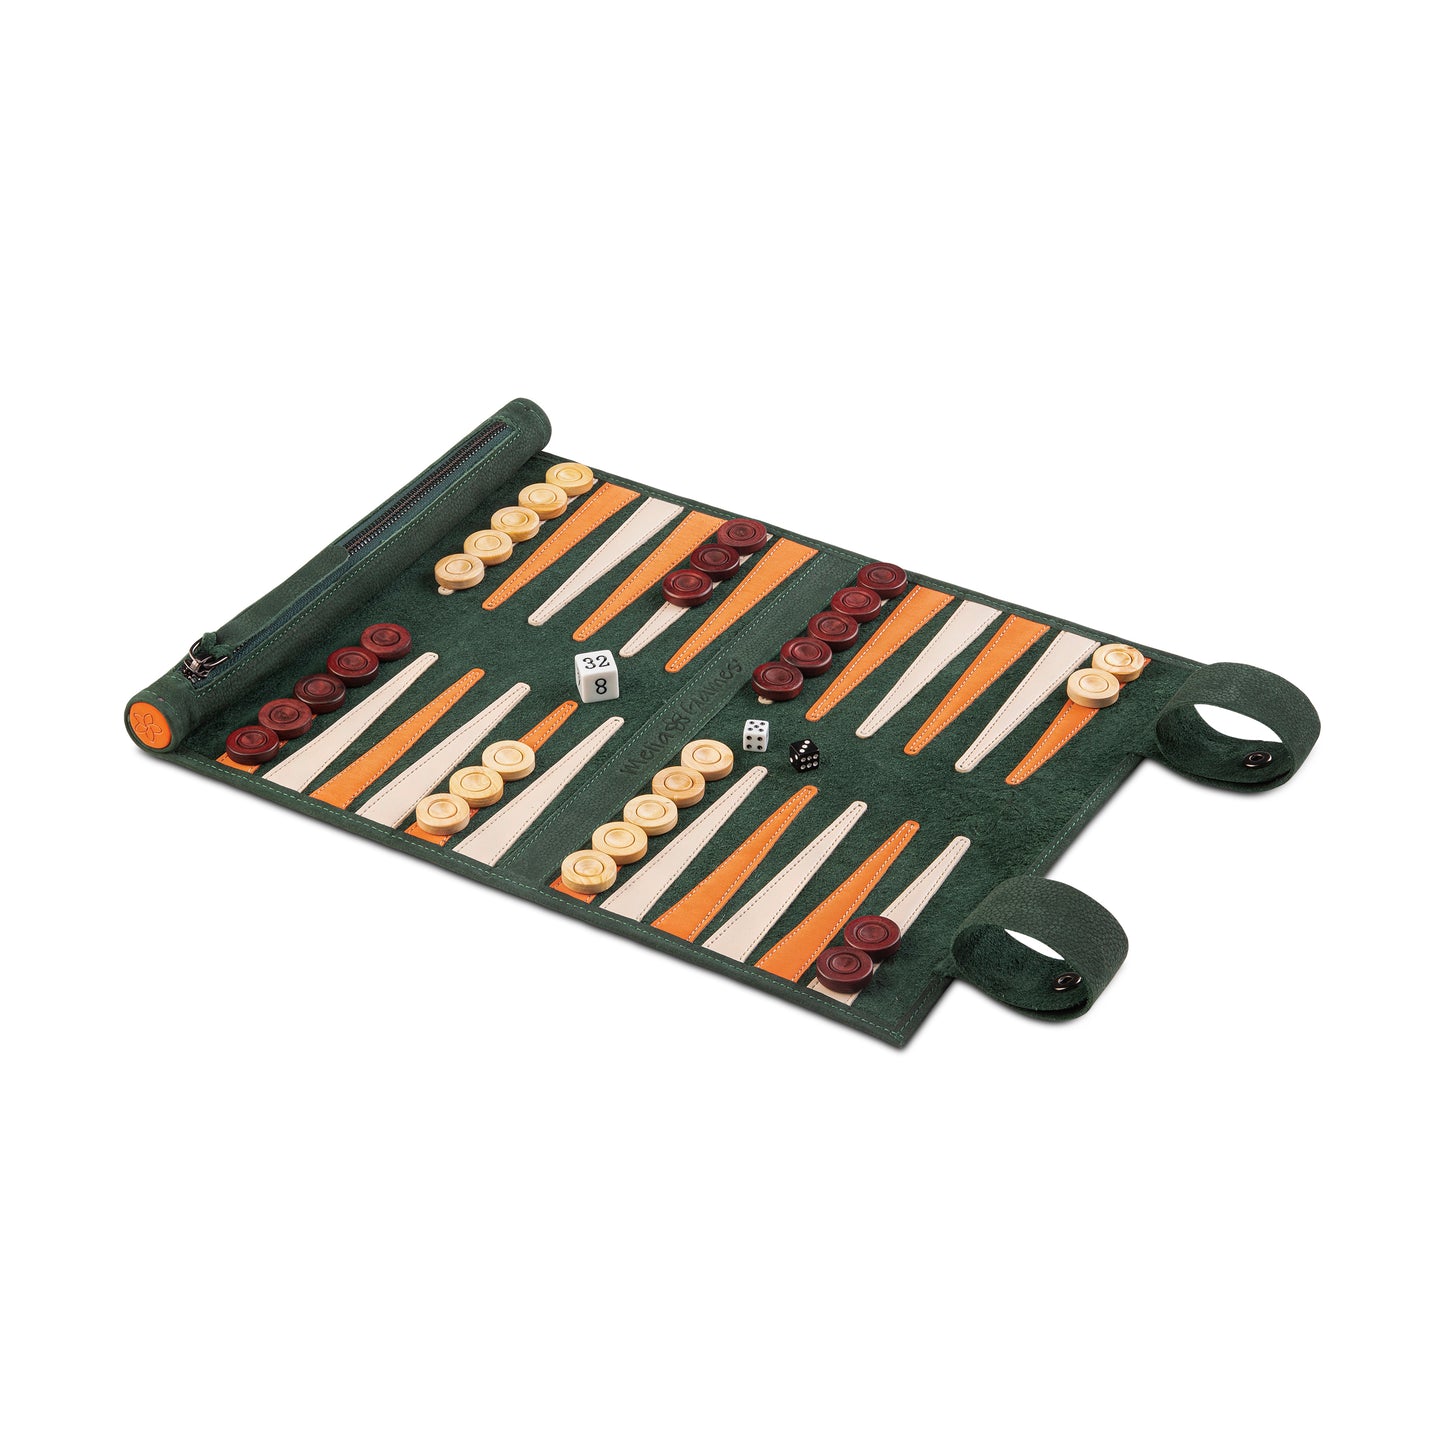 Roll up Leather Backgammon Set - Eire - Full Leather Travel Version